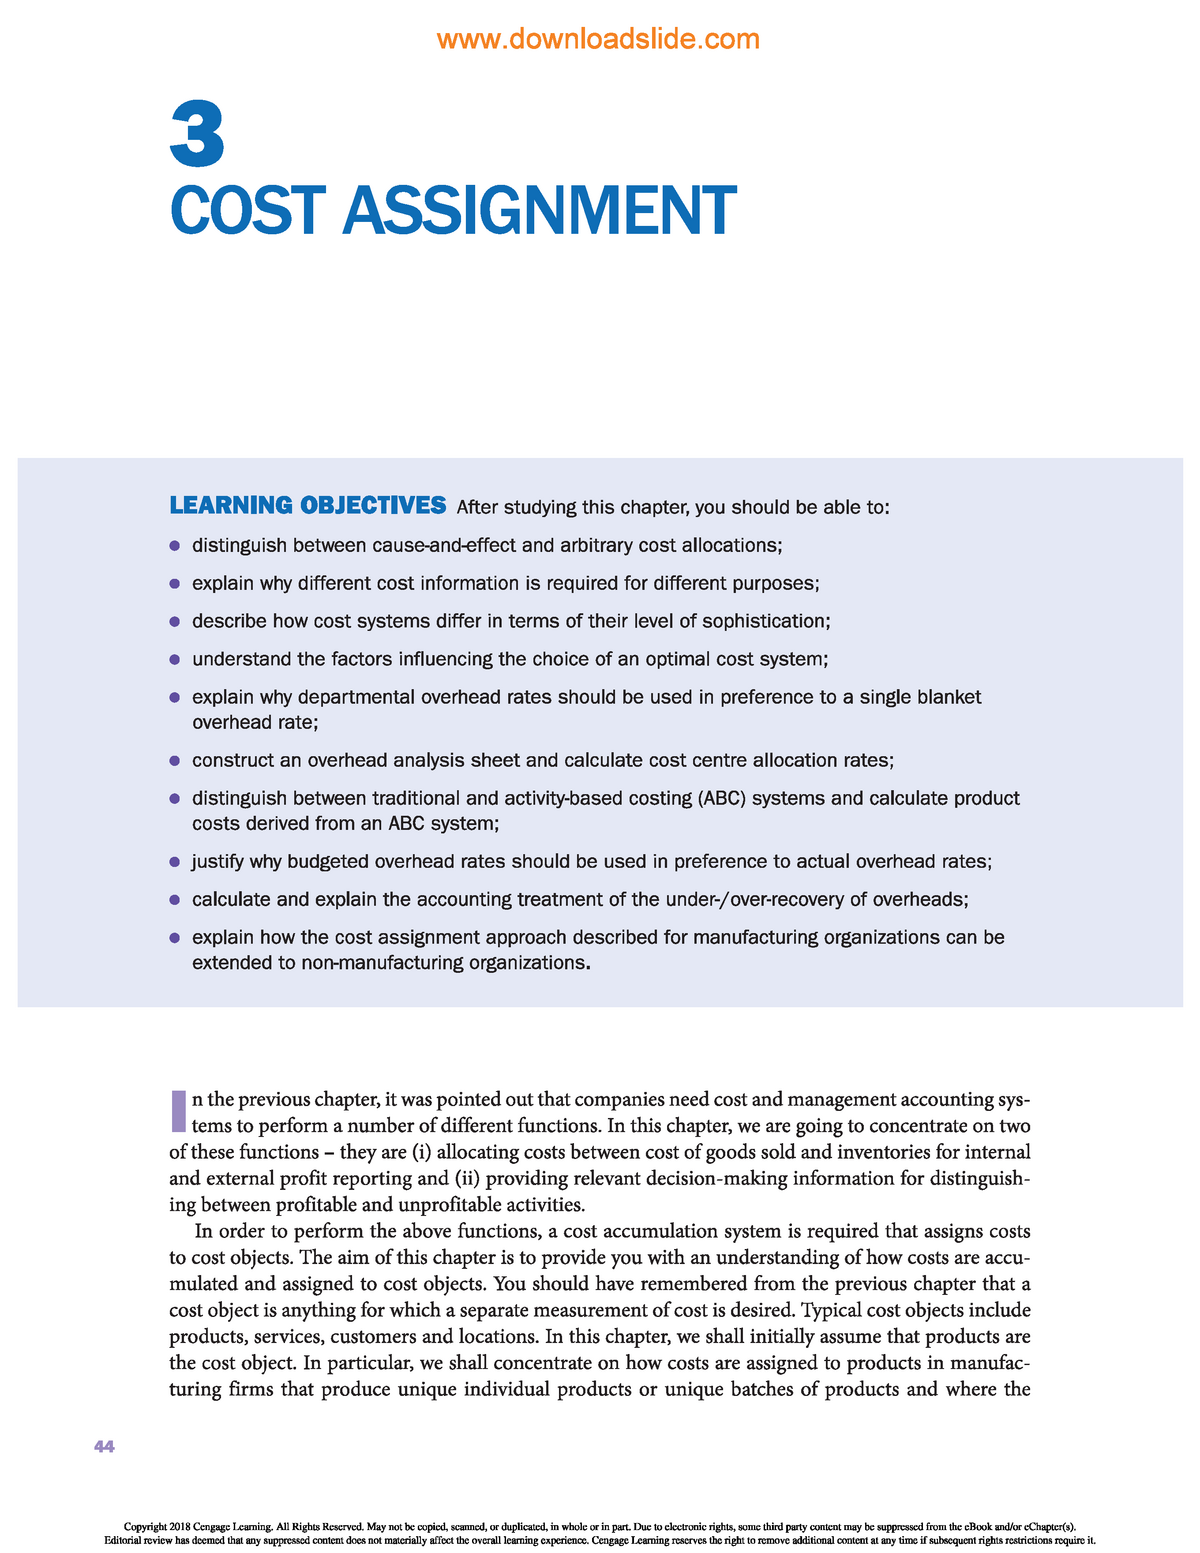 explain cost assignment with examples